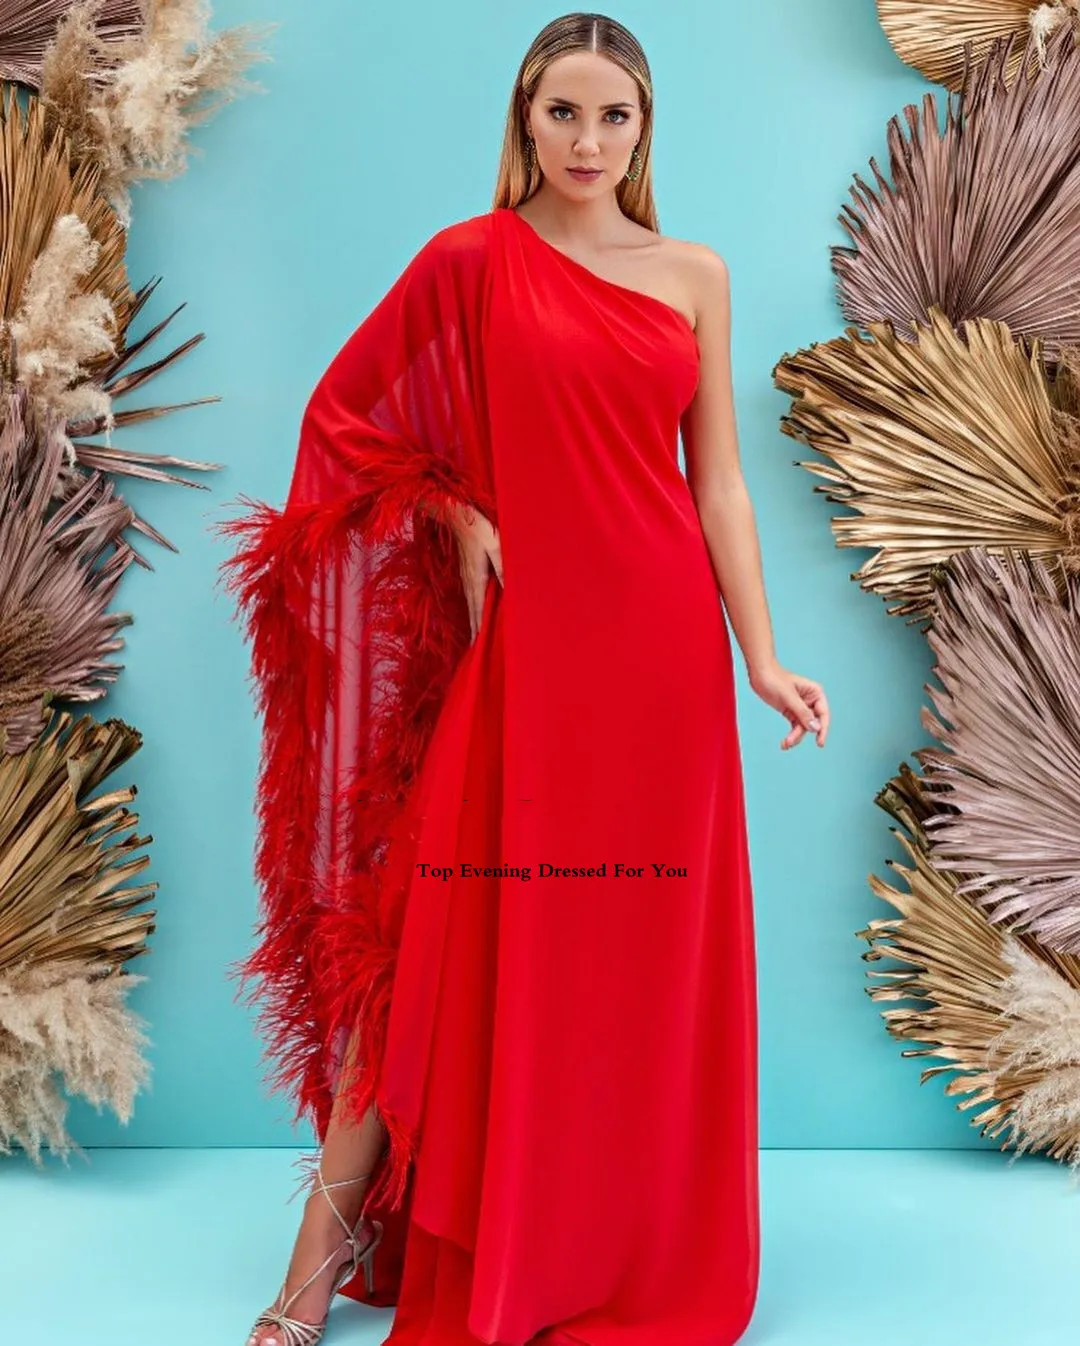 

Red A Line Feathers Formal Evening Dresses One Shoulder Puff Long Sleeve Dubai Kaftan Formal Party Prom Dress robes de soiree